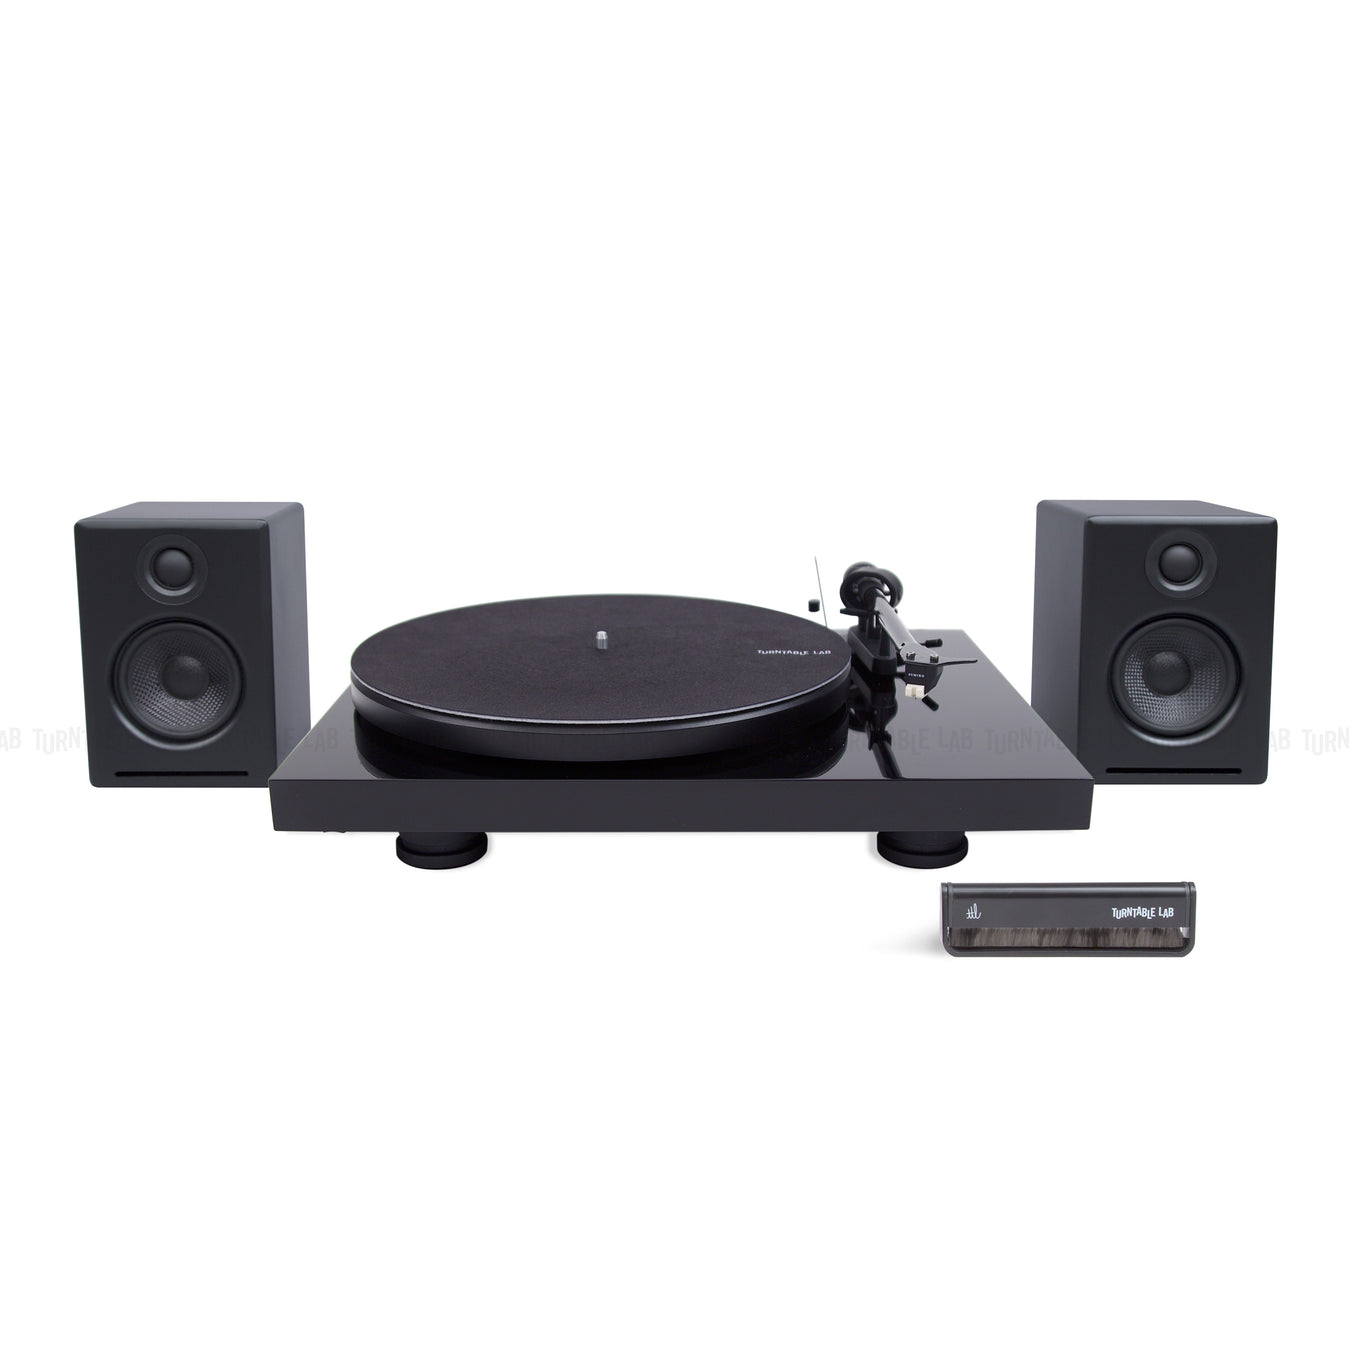 #TTLGuide - Pro-Ject Debut Carbon DC Turntable